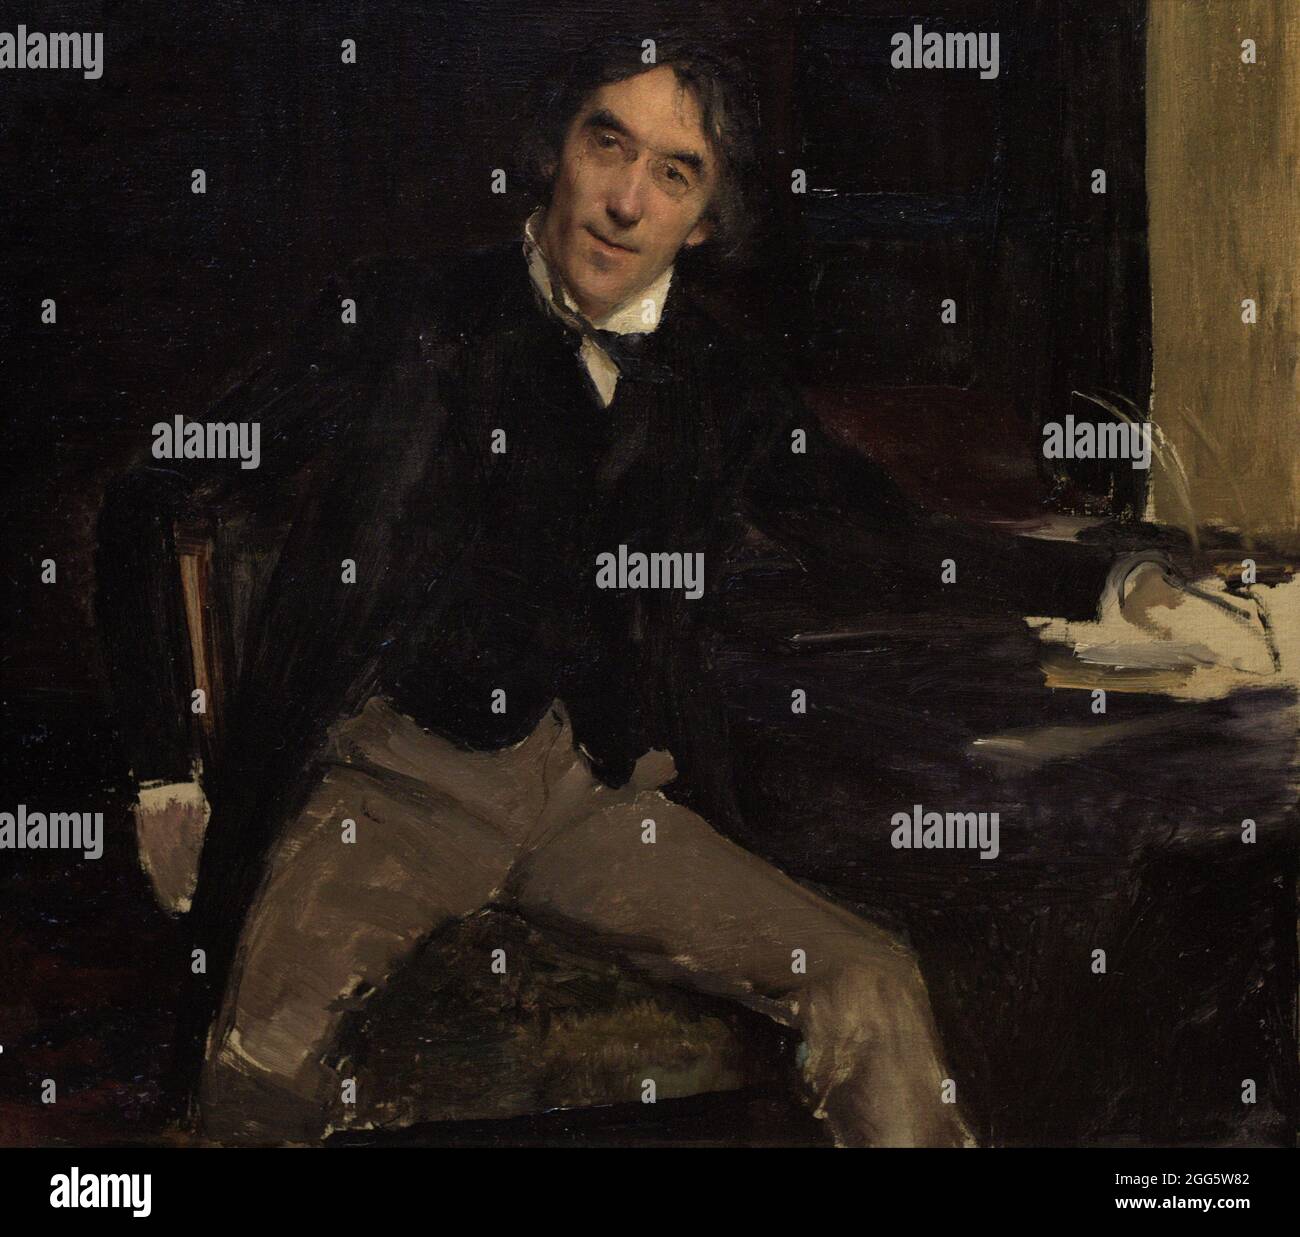 Sir Henry Irving (1838-1905). English theatre actor. First actor to be knighted for services to the stage (1895). Portrait by Jules Bastien-Lepage (1848-1884). Oil on canvas (46 x 47,5 cm), 1880. National Portrait Gallery. London, England, United Kingdom. Stock Photo